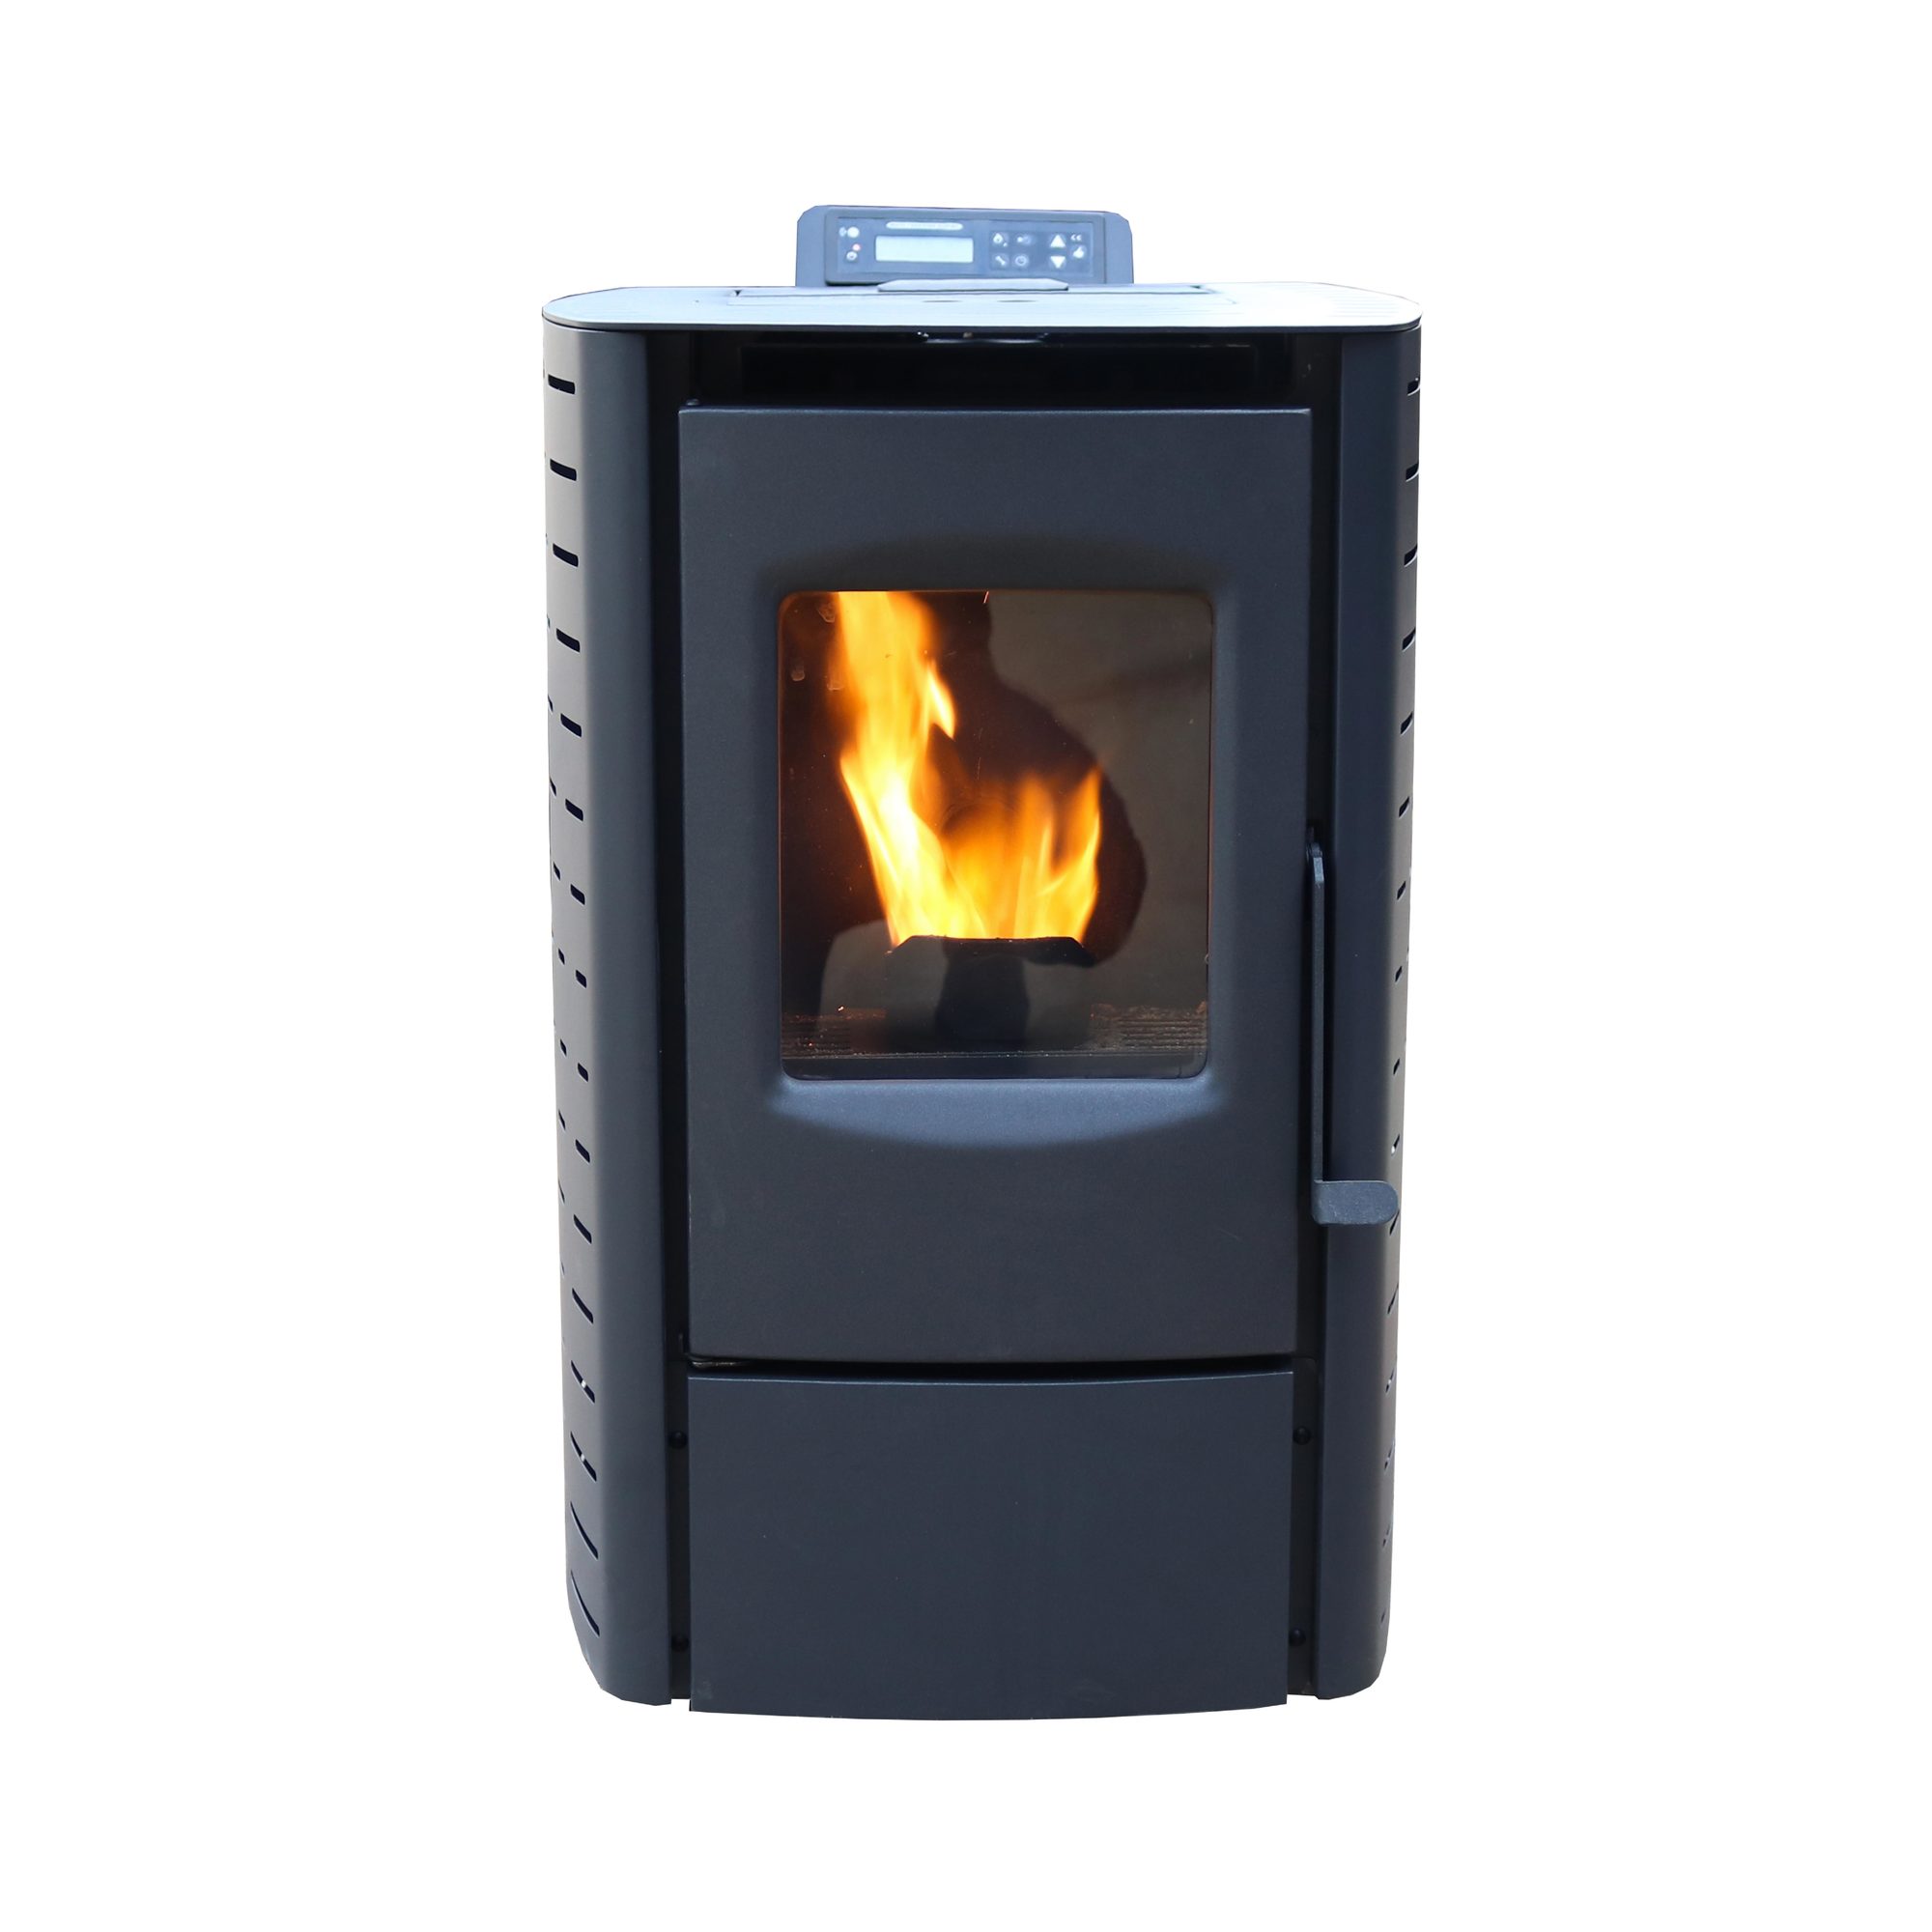 Cleveland Iron Works Pellet Stove with Smart Home Technology, 21,064 BTU, EPA-Certified, Model PS20W-CIW